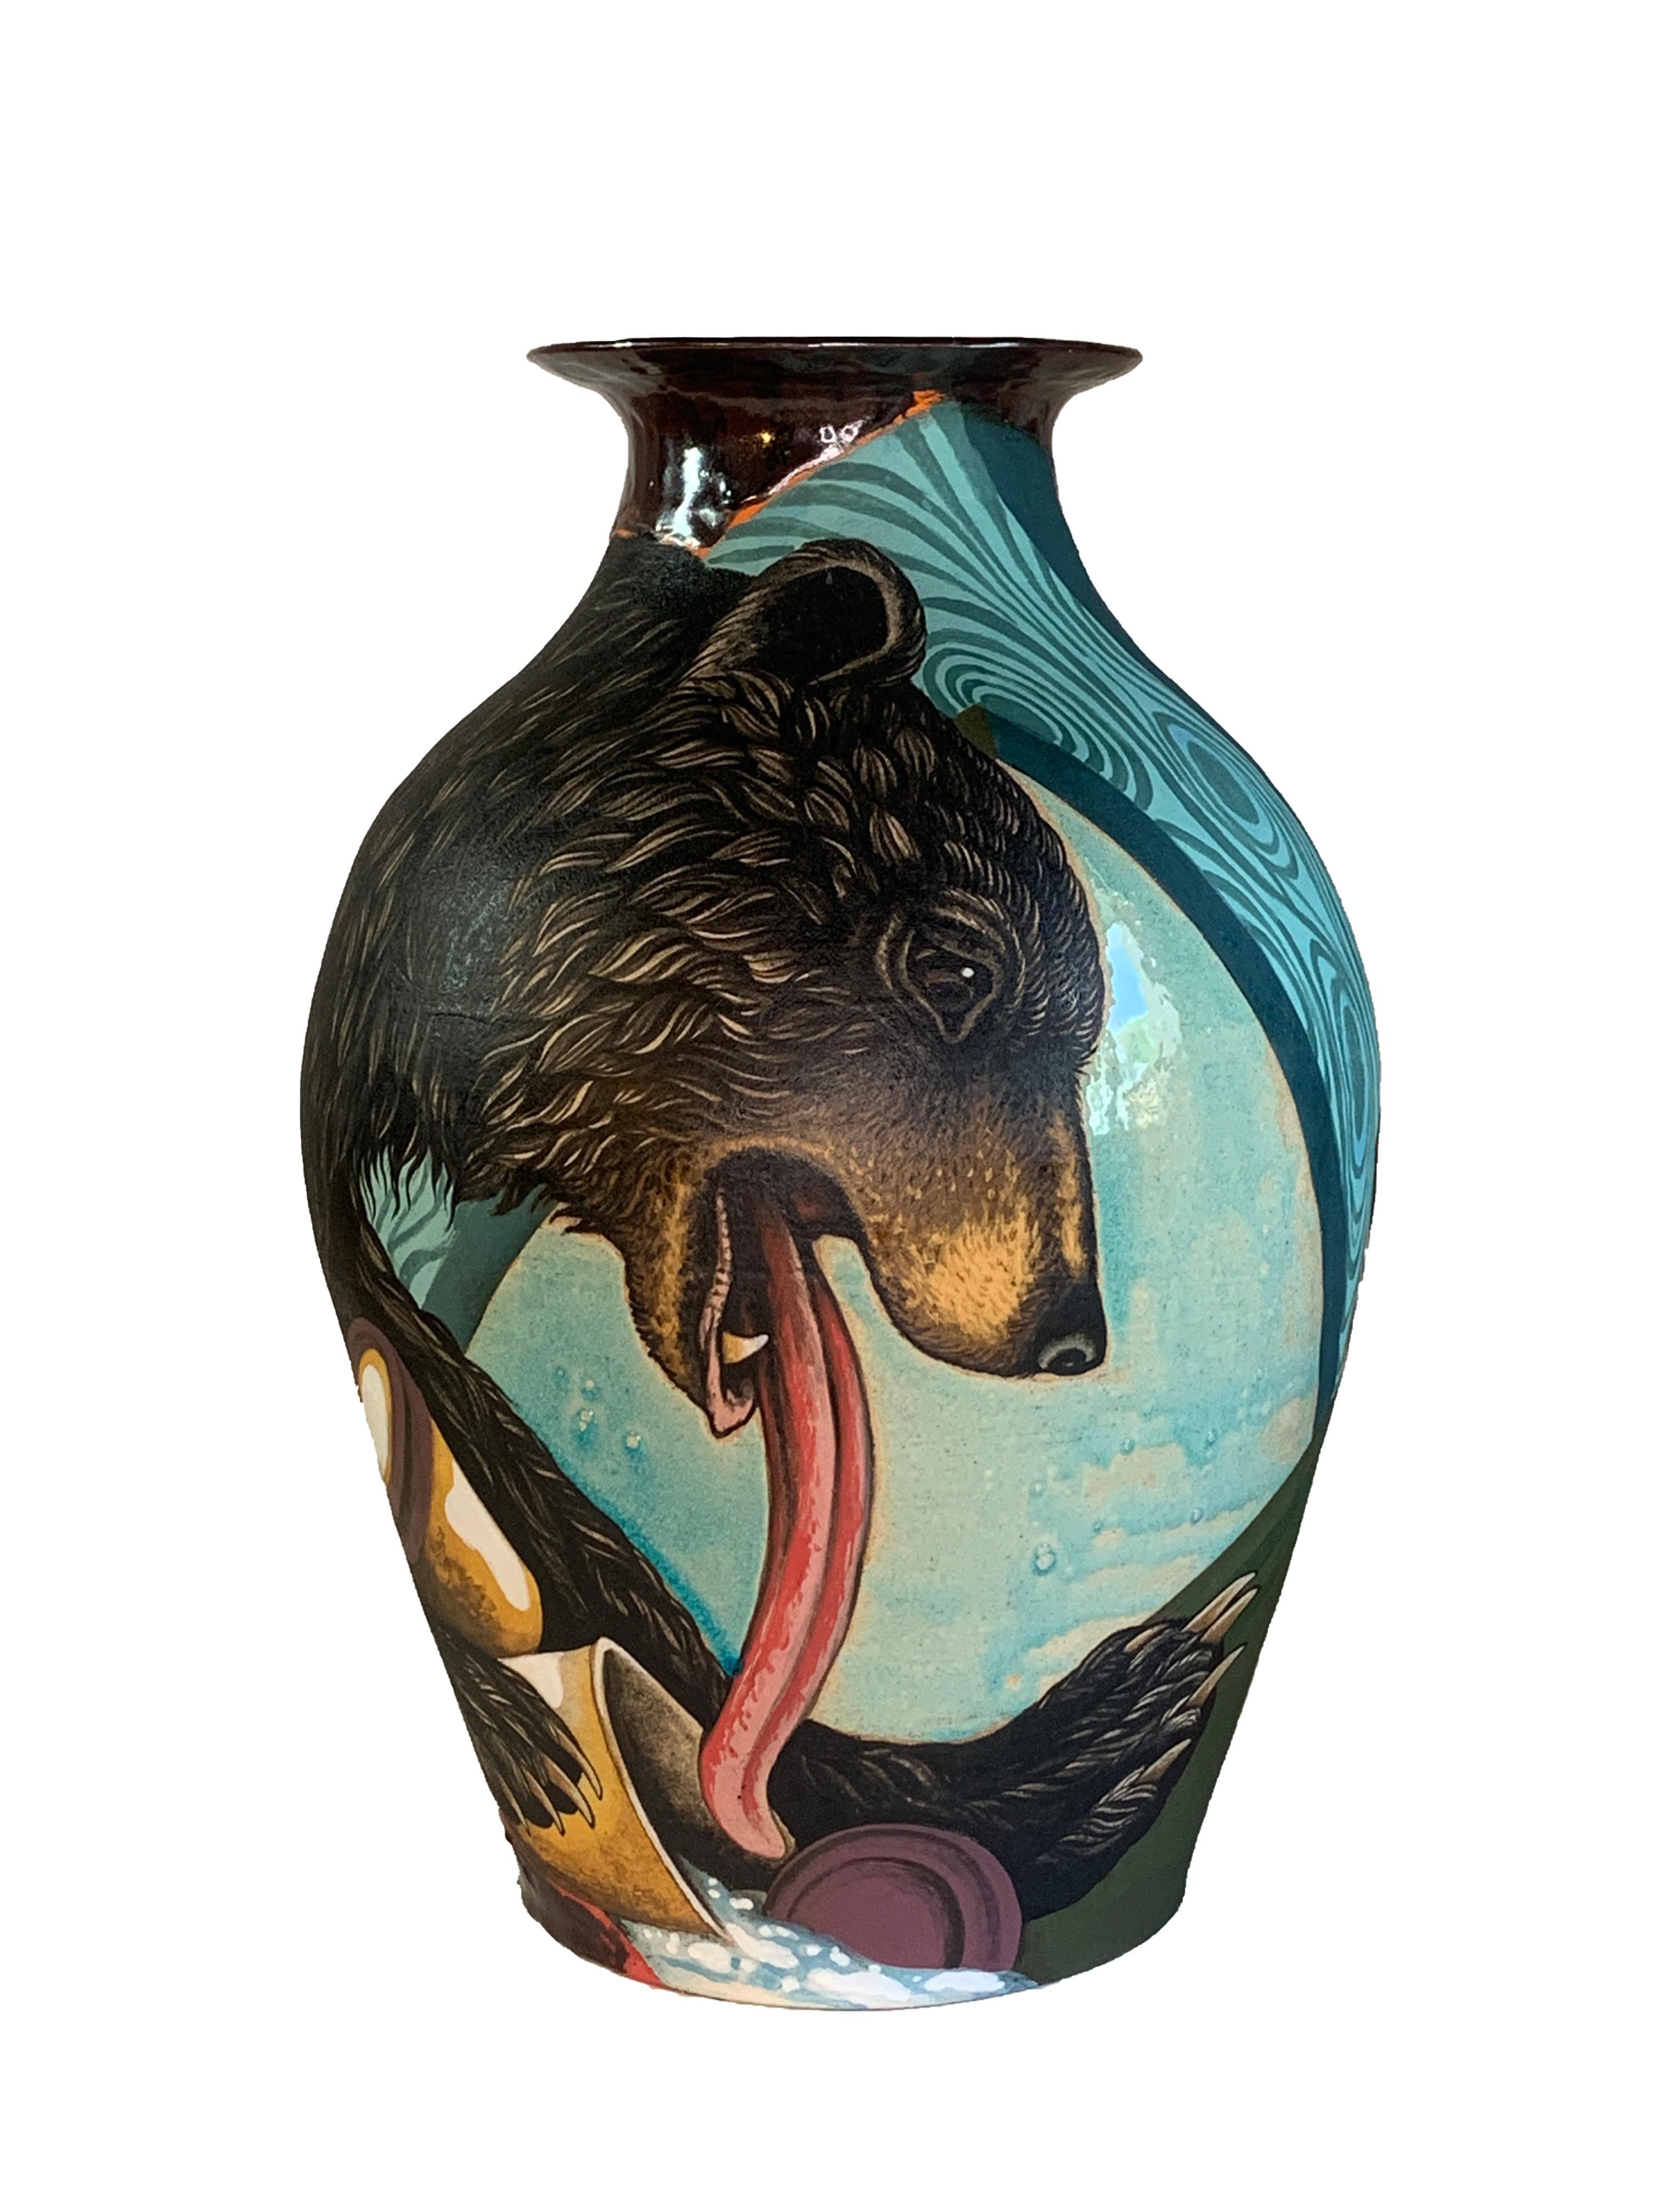 Bryan Burk Animal Painting - "Black Bear, Just Right", Ceramic Vase Form with Painted Surface Illustration